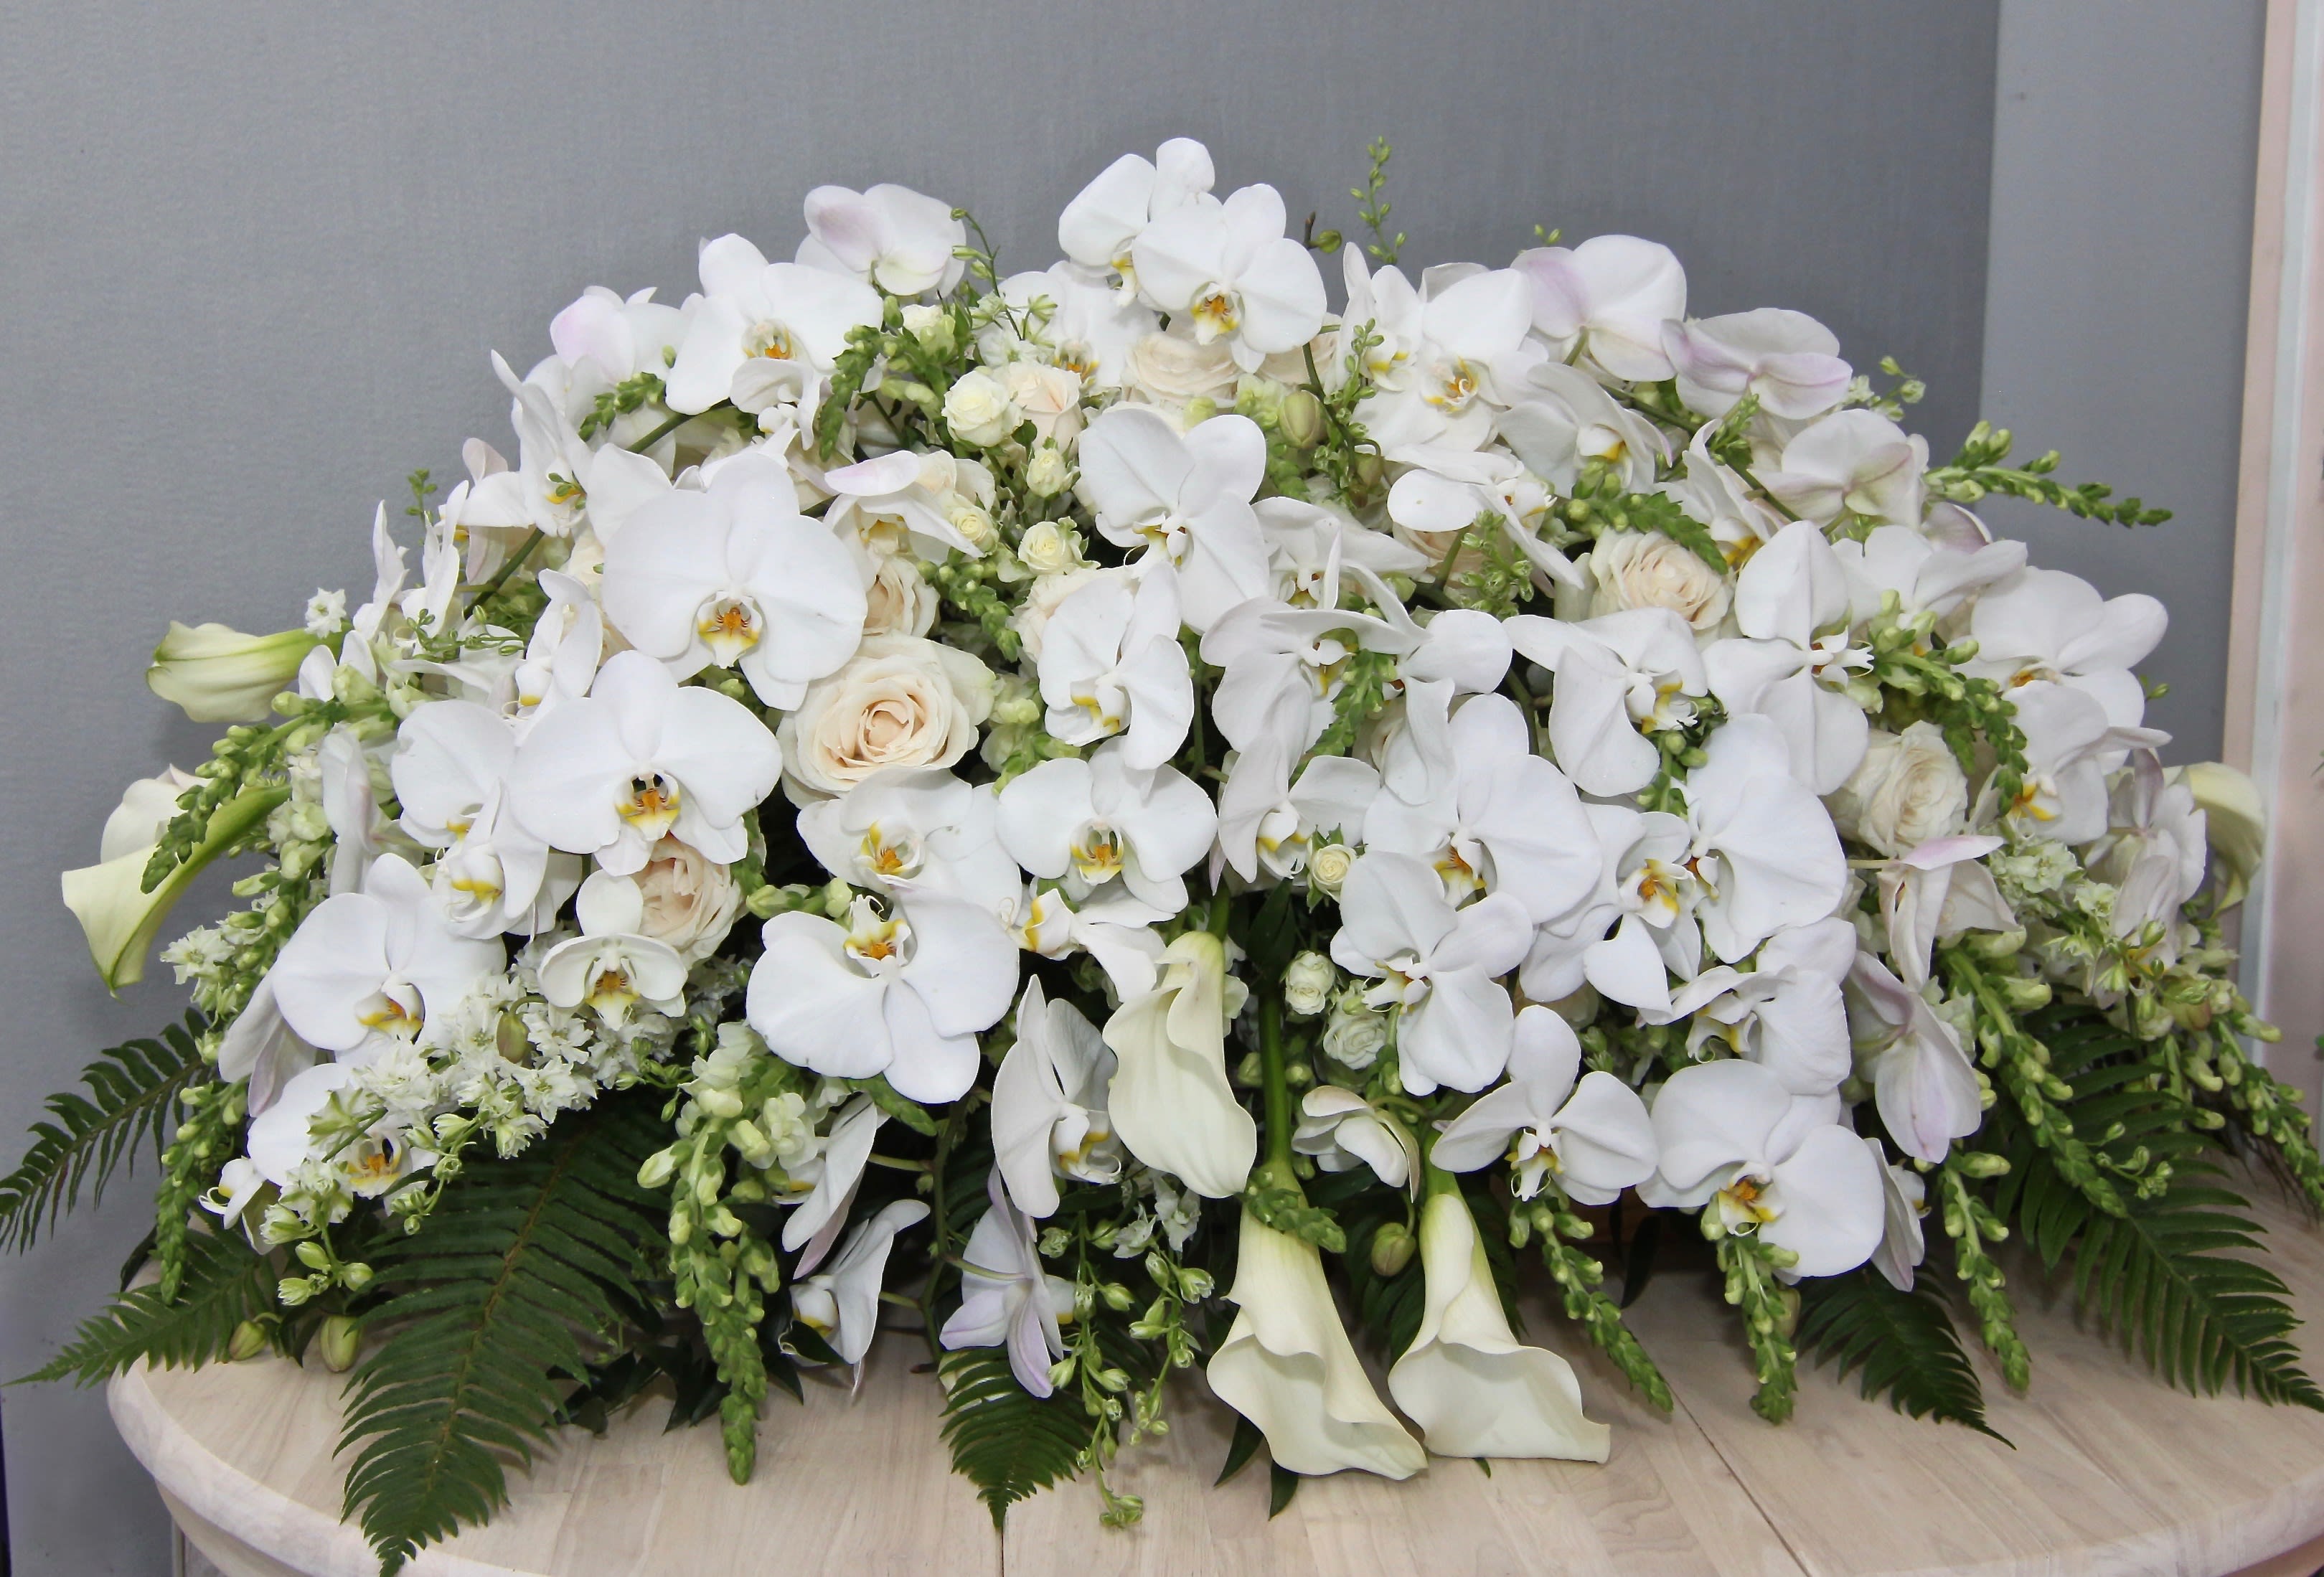 Orchid and Calla Lily Casket  - This casket arrangement includes white orchids, calla lilies, roses, and snapdragons. 